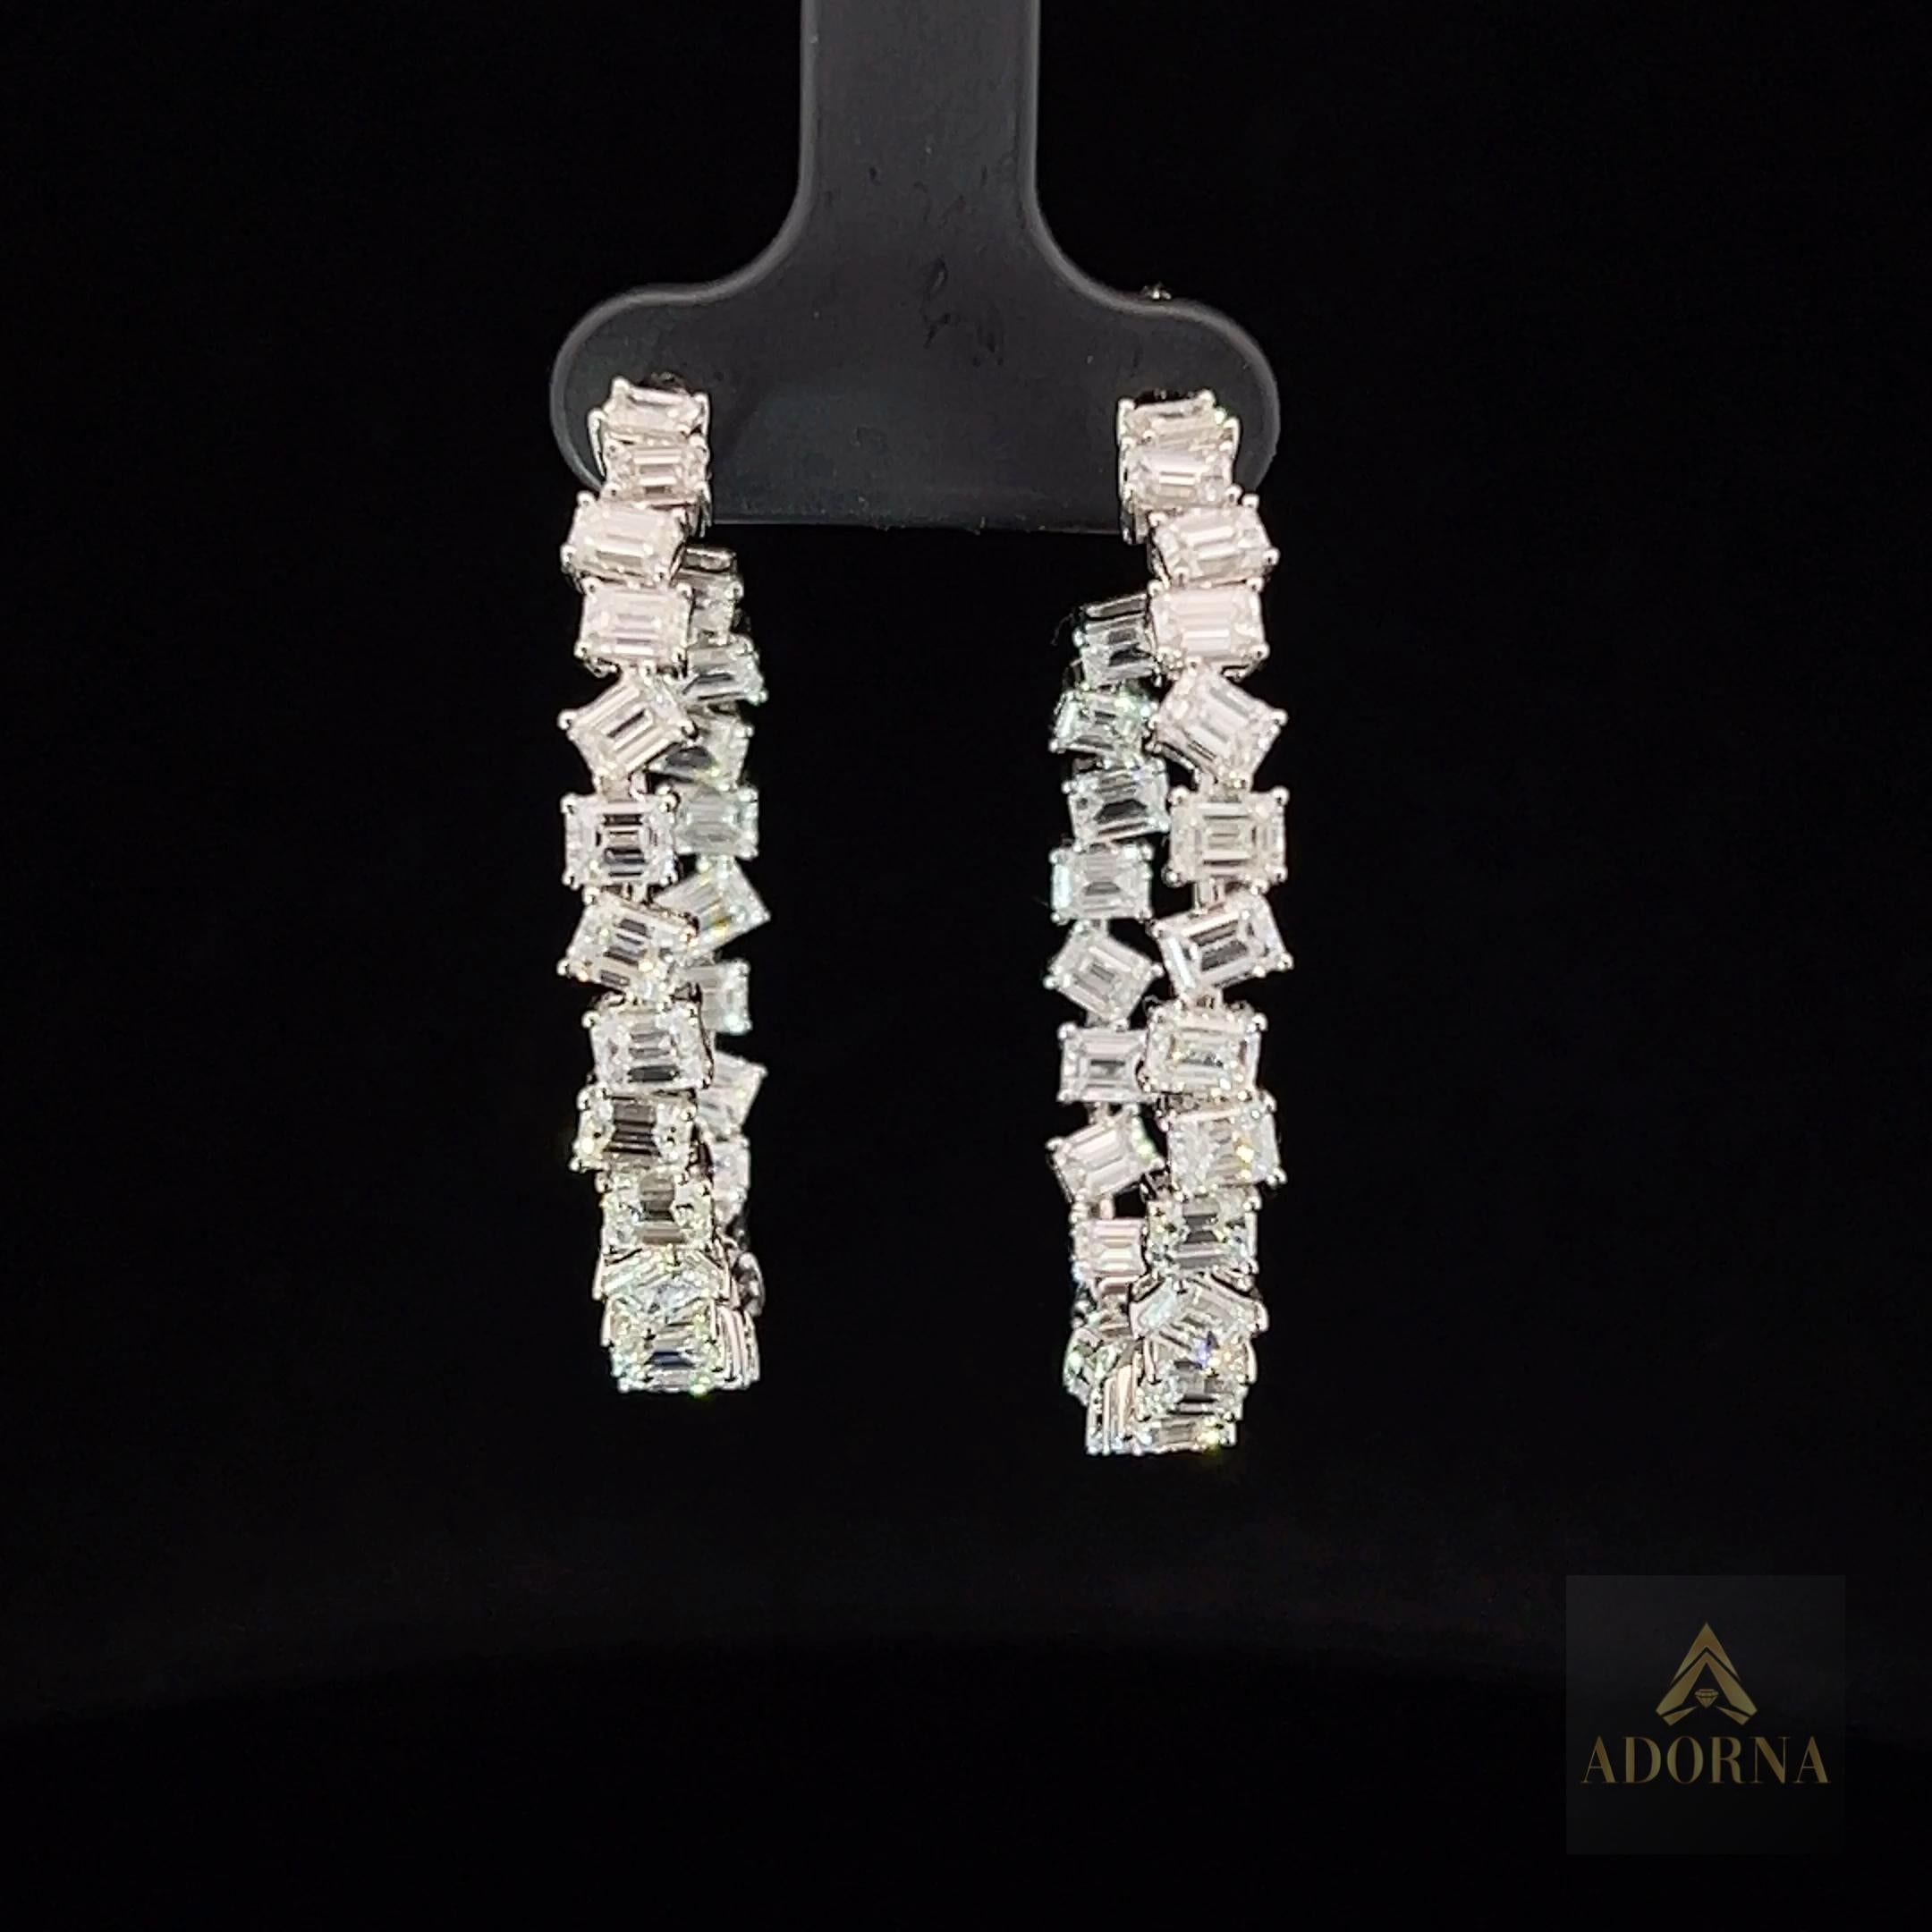 Earring Information
Diamond Type : Natural Diamond
Metal : 18K
Metal Color : White Gold
Diamond Carat Weight : 7.35ttcw
Emerald Diamonds Count : 50


JEWELRY CARE
Over the course of time, body oil and skin products can collect on Jewelry and leave a